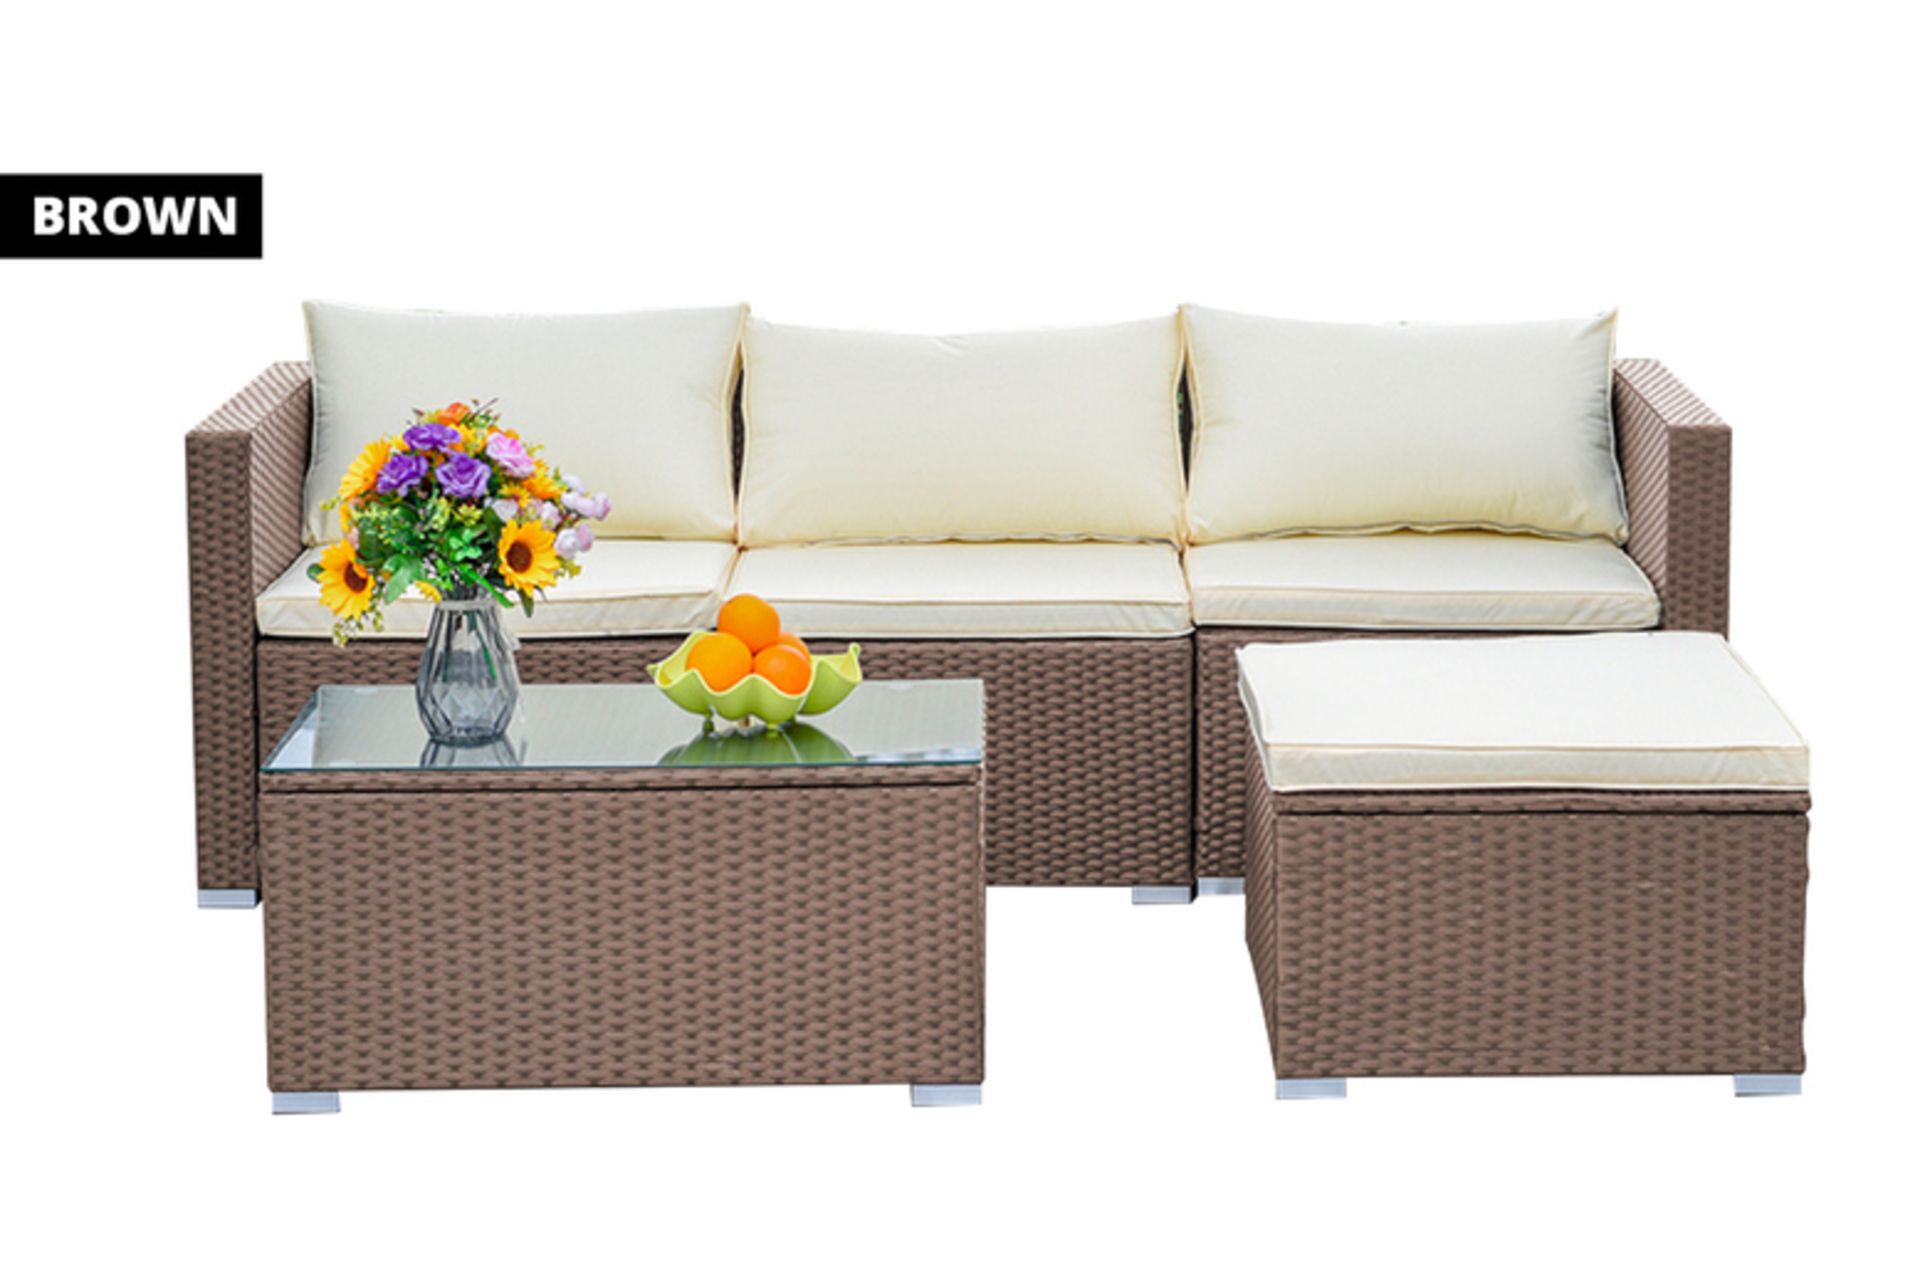 FREE DELIVERY - NEW MODULAR 4-SEATER RATTAN GARDEN SOFA SET - BROWN - Image 2 of 2